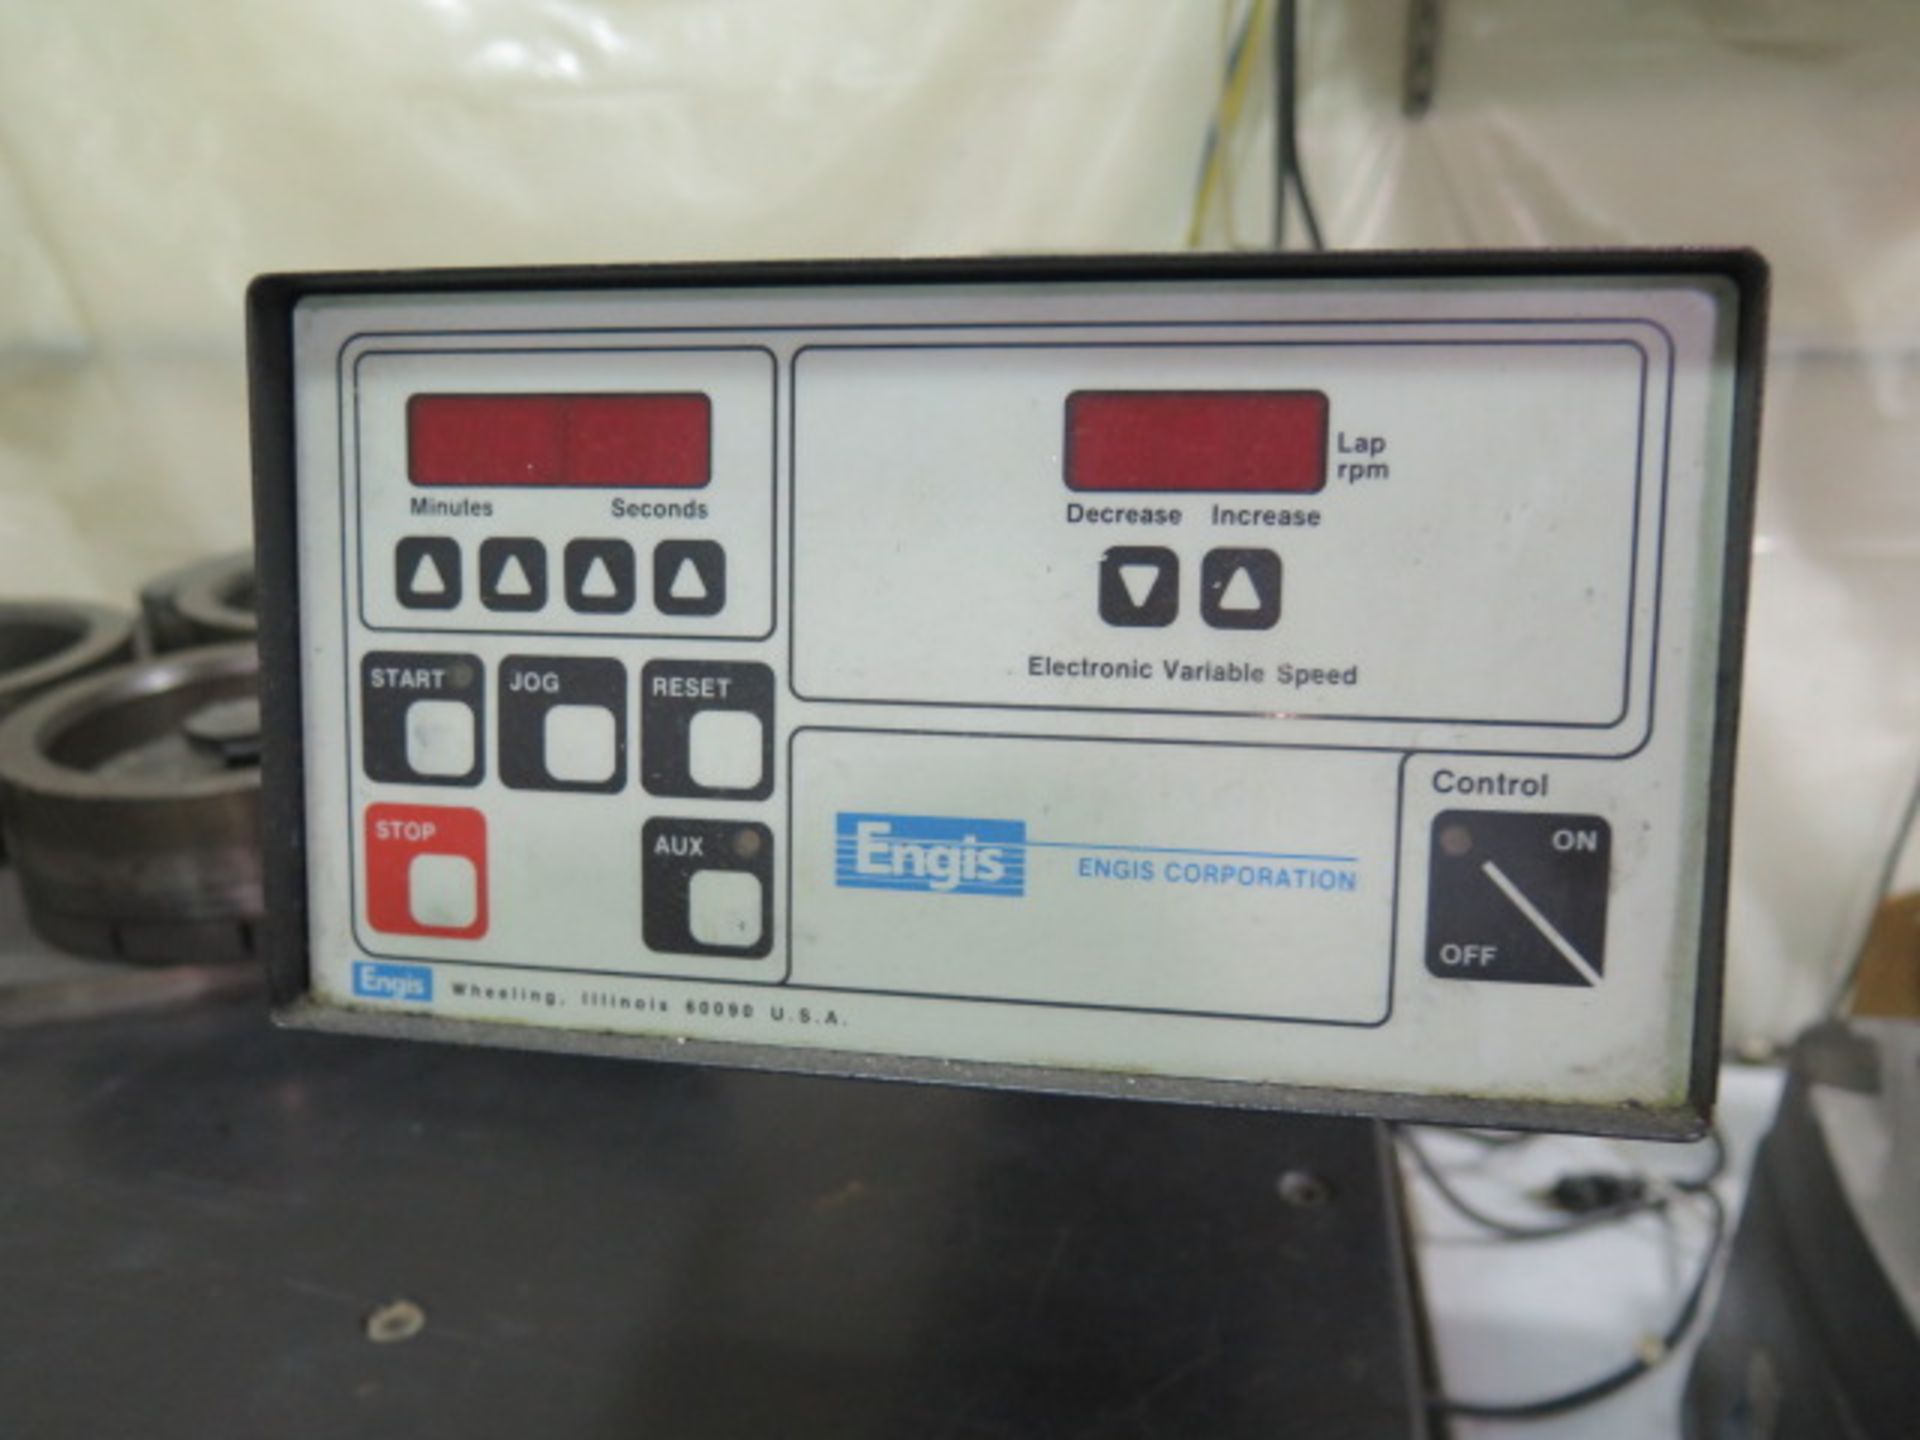 Engis Corp “Hyprex Lapping System” s/n 726LM15 w/ Engis Digital Controls, 15” Lapping Plate, - Image 6 of 10